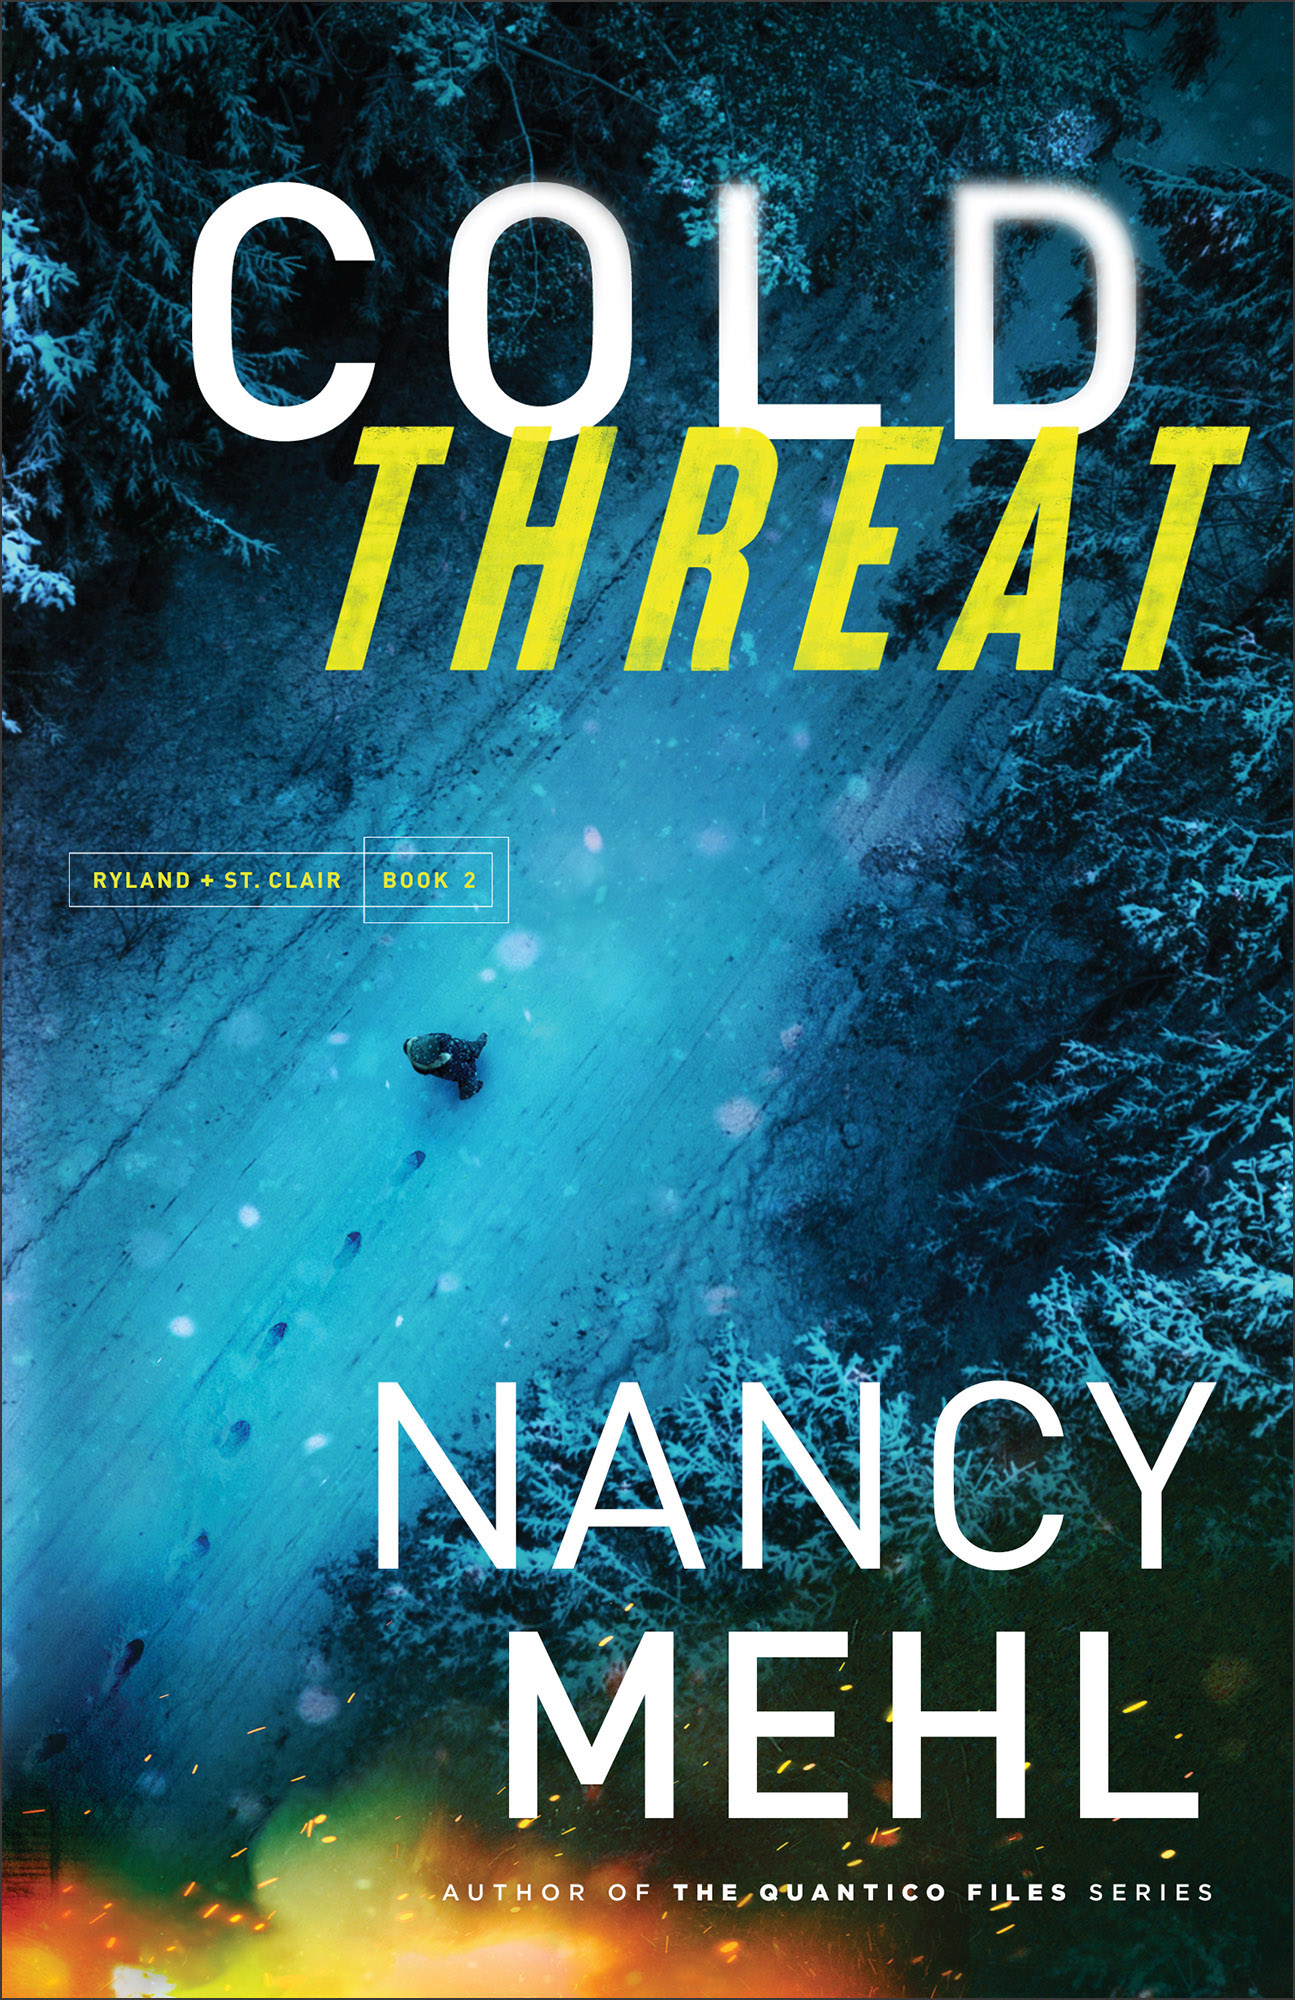 Cold Threat by Nancy Mehl - January 22 - February 2